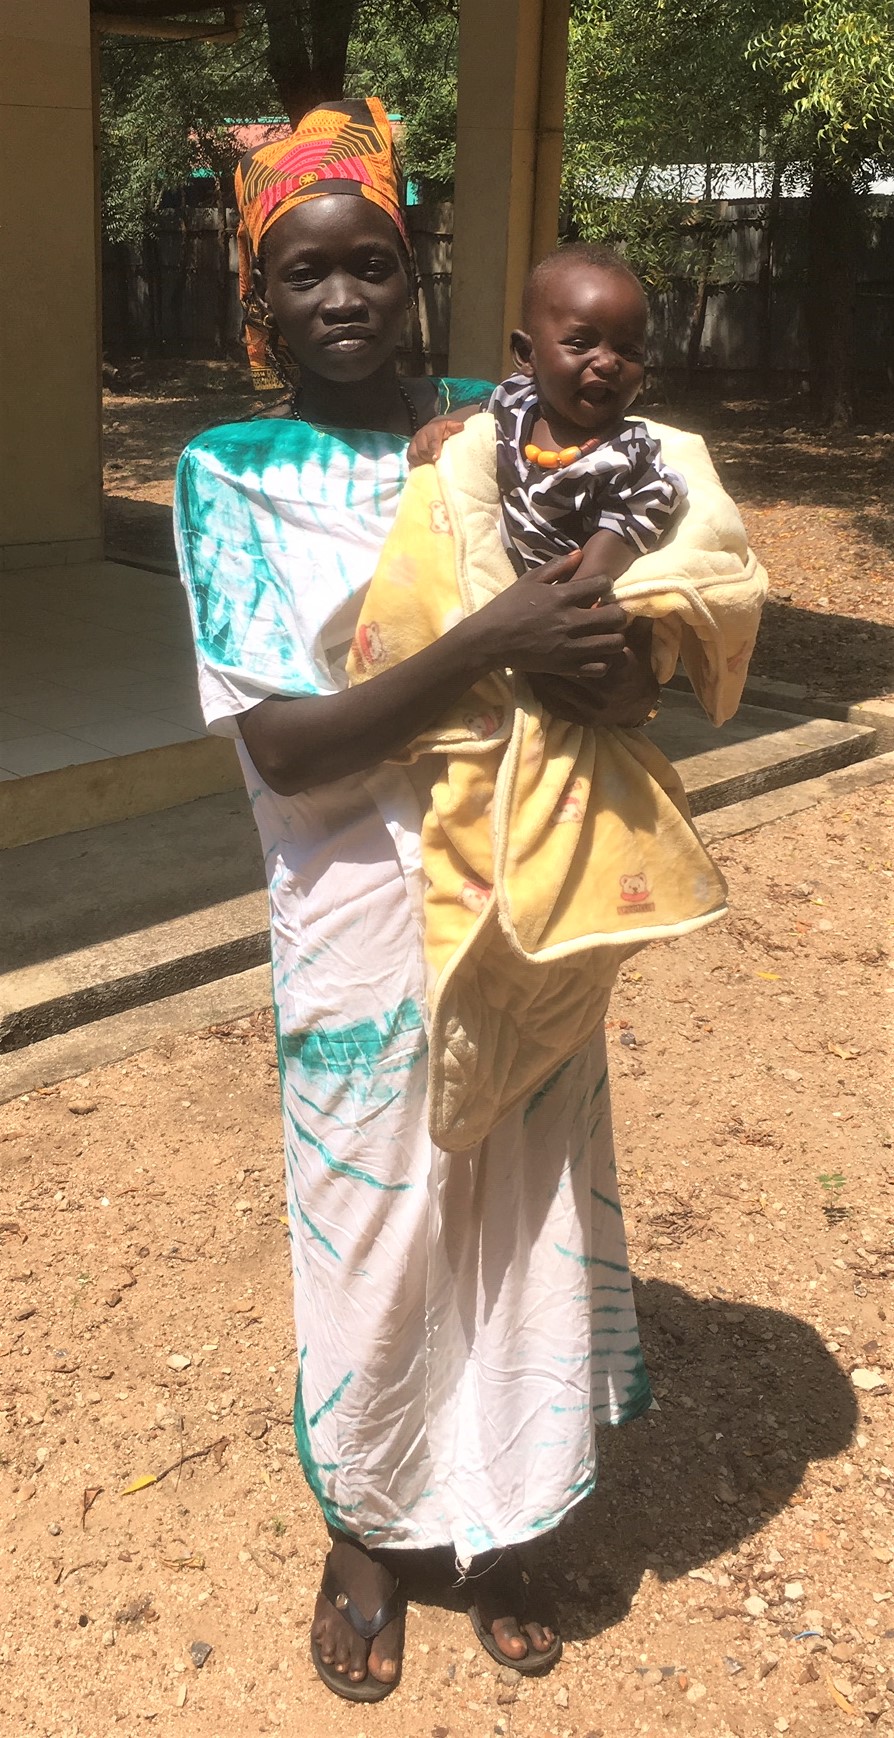  Mary Nyajuok John Palek from Jewi Refugee camp. She came to the first session of the Audio training in June and was VERY pregnant. Now she's back with her first-born, son Boi (meaning Light). She has been named as the leader of the trauma healing gr